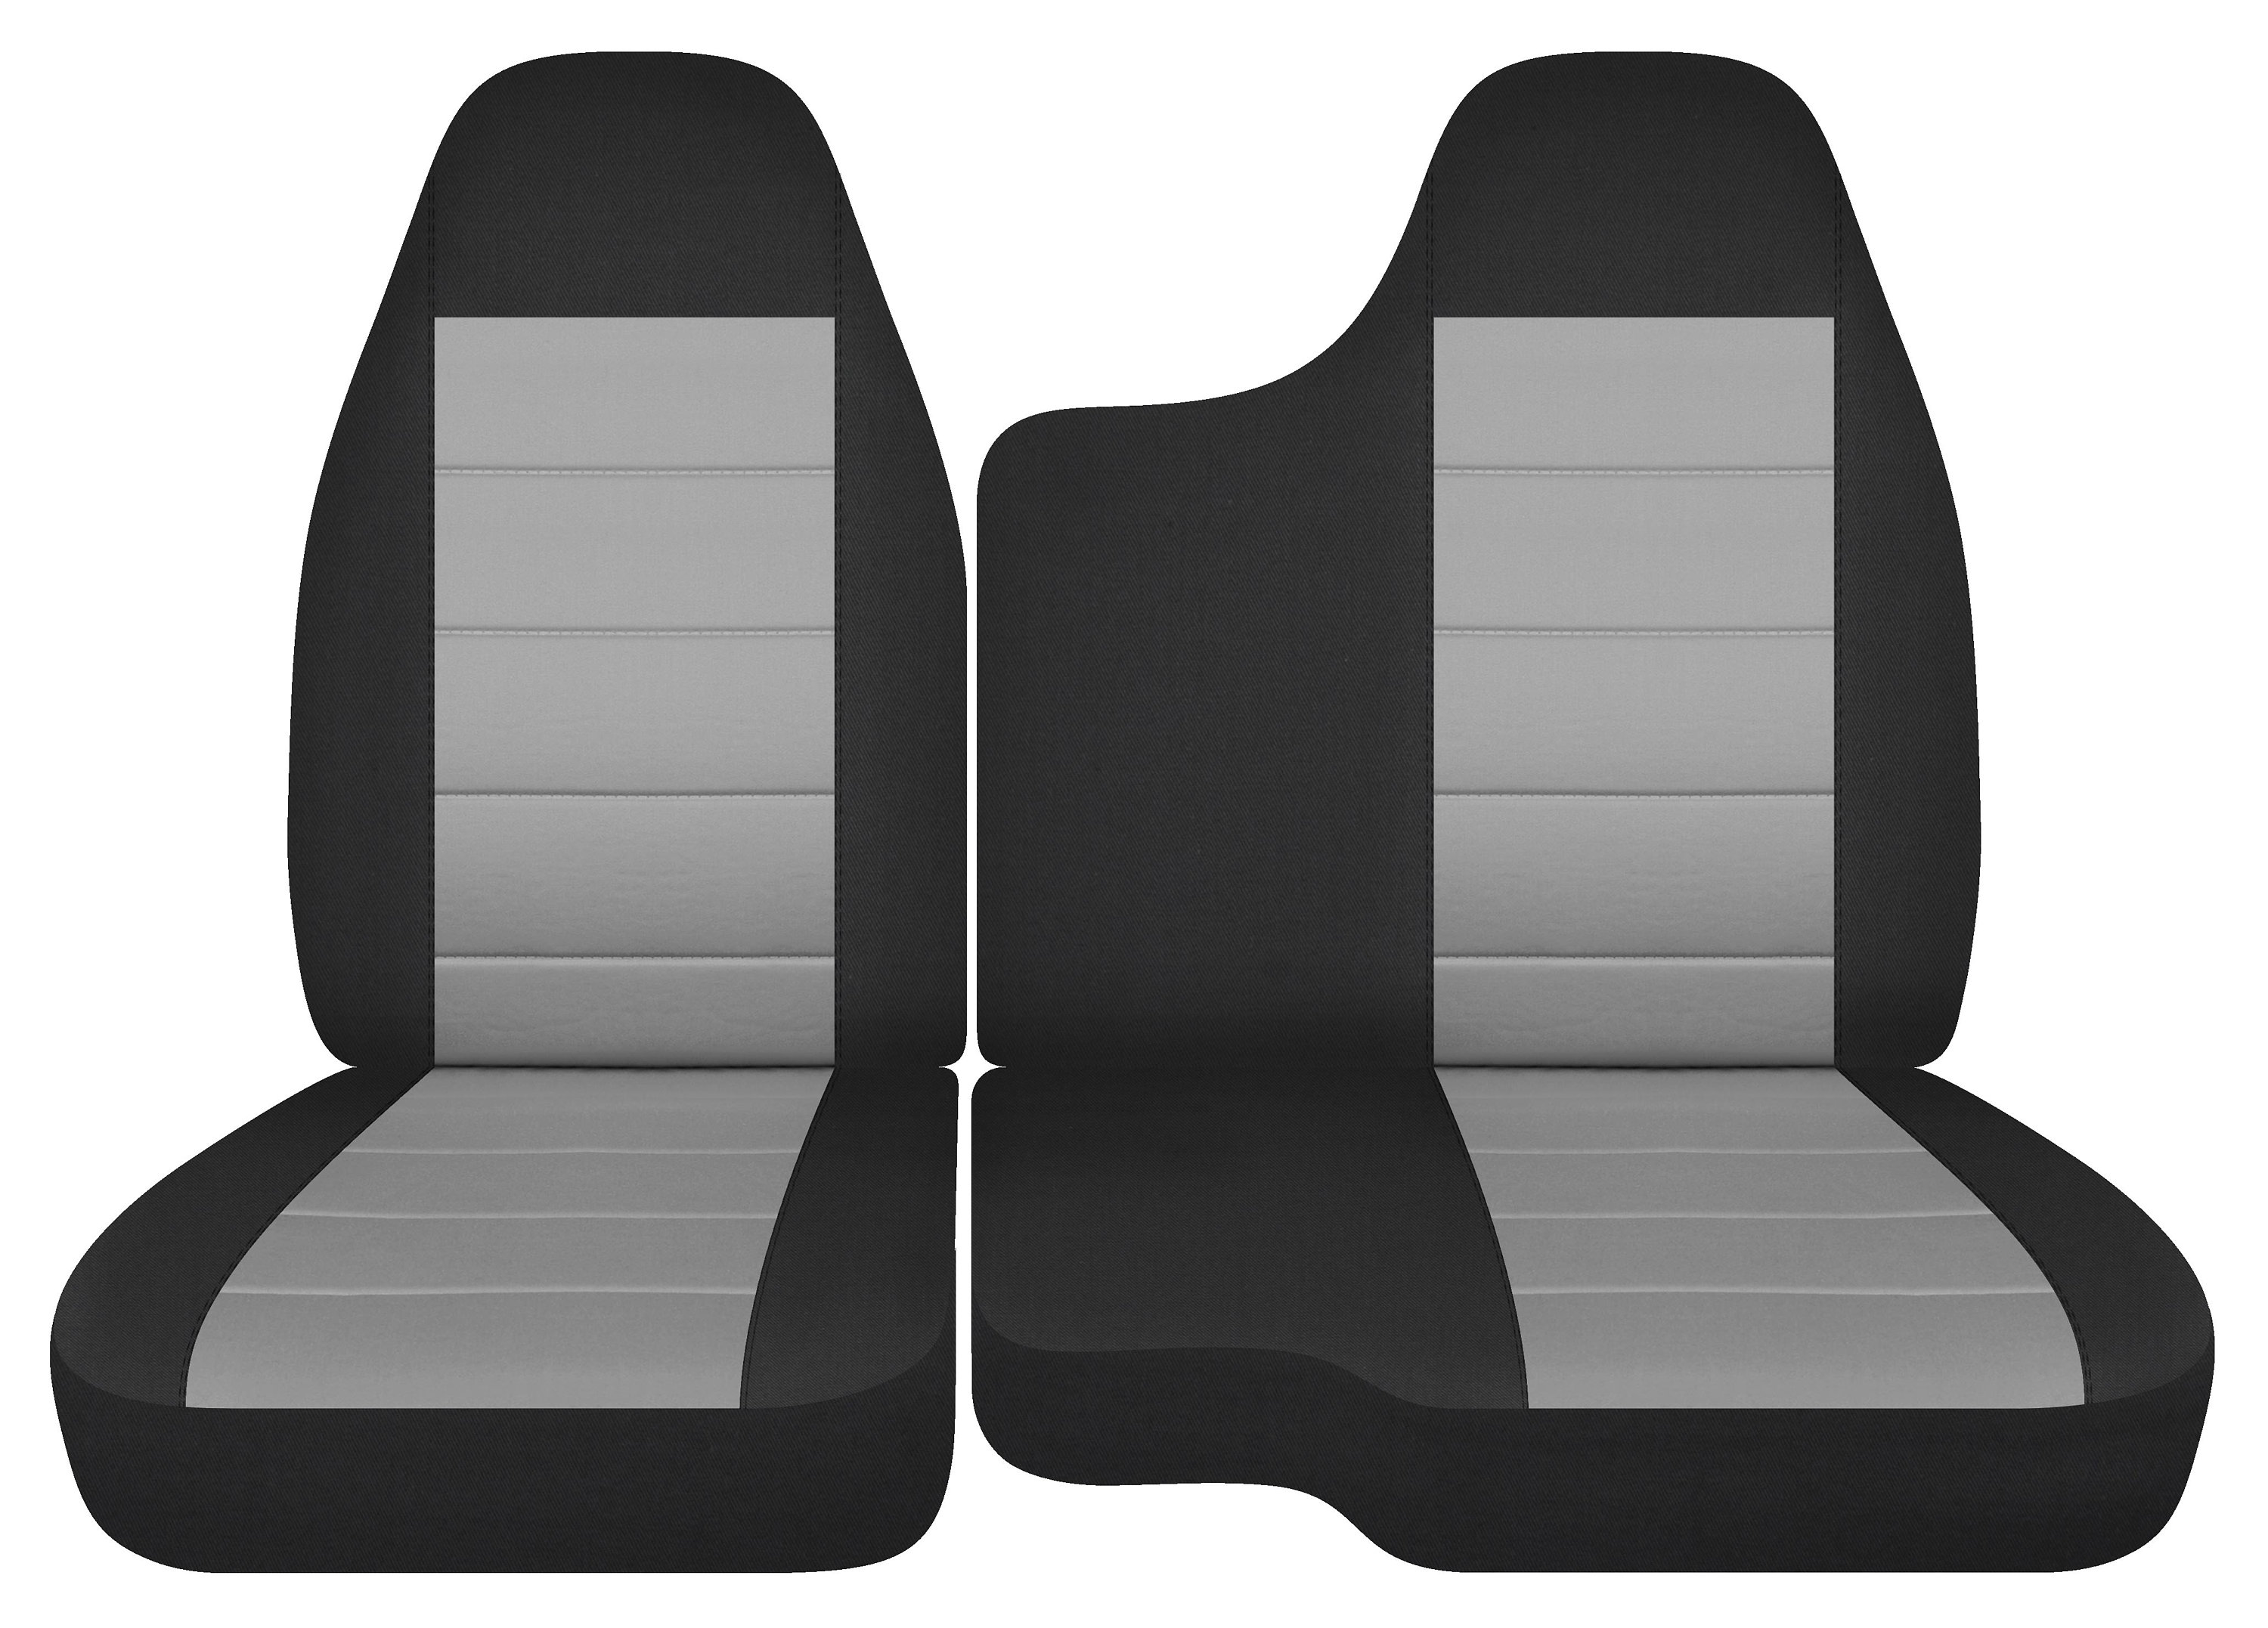 Buy Chevy Silverado Seat Covers Online In India Etsy India